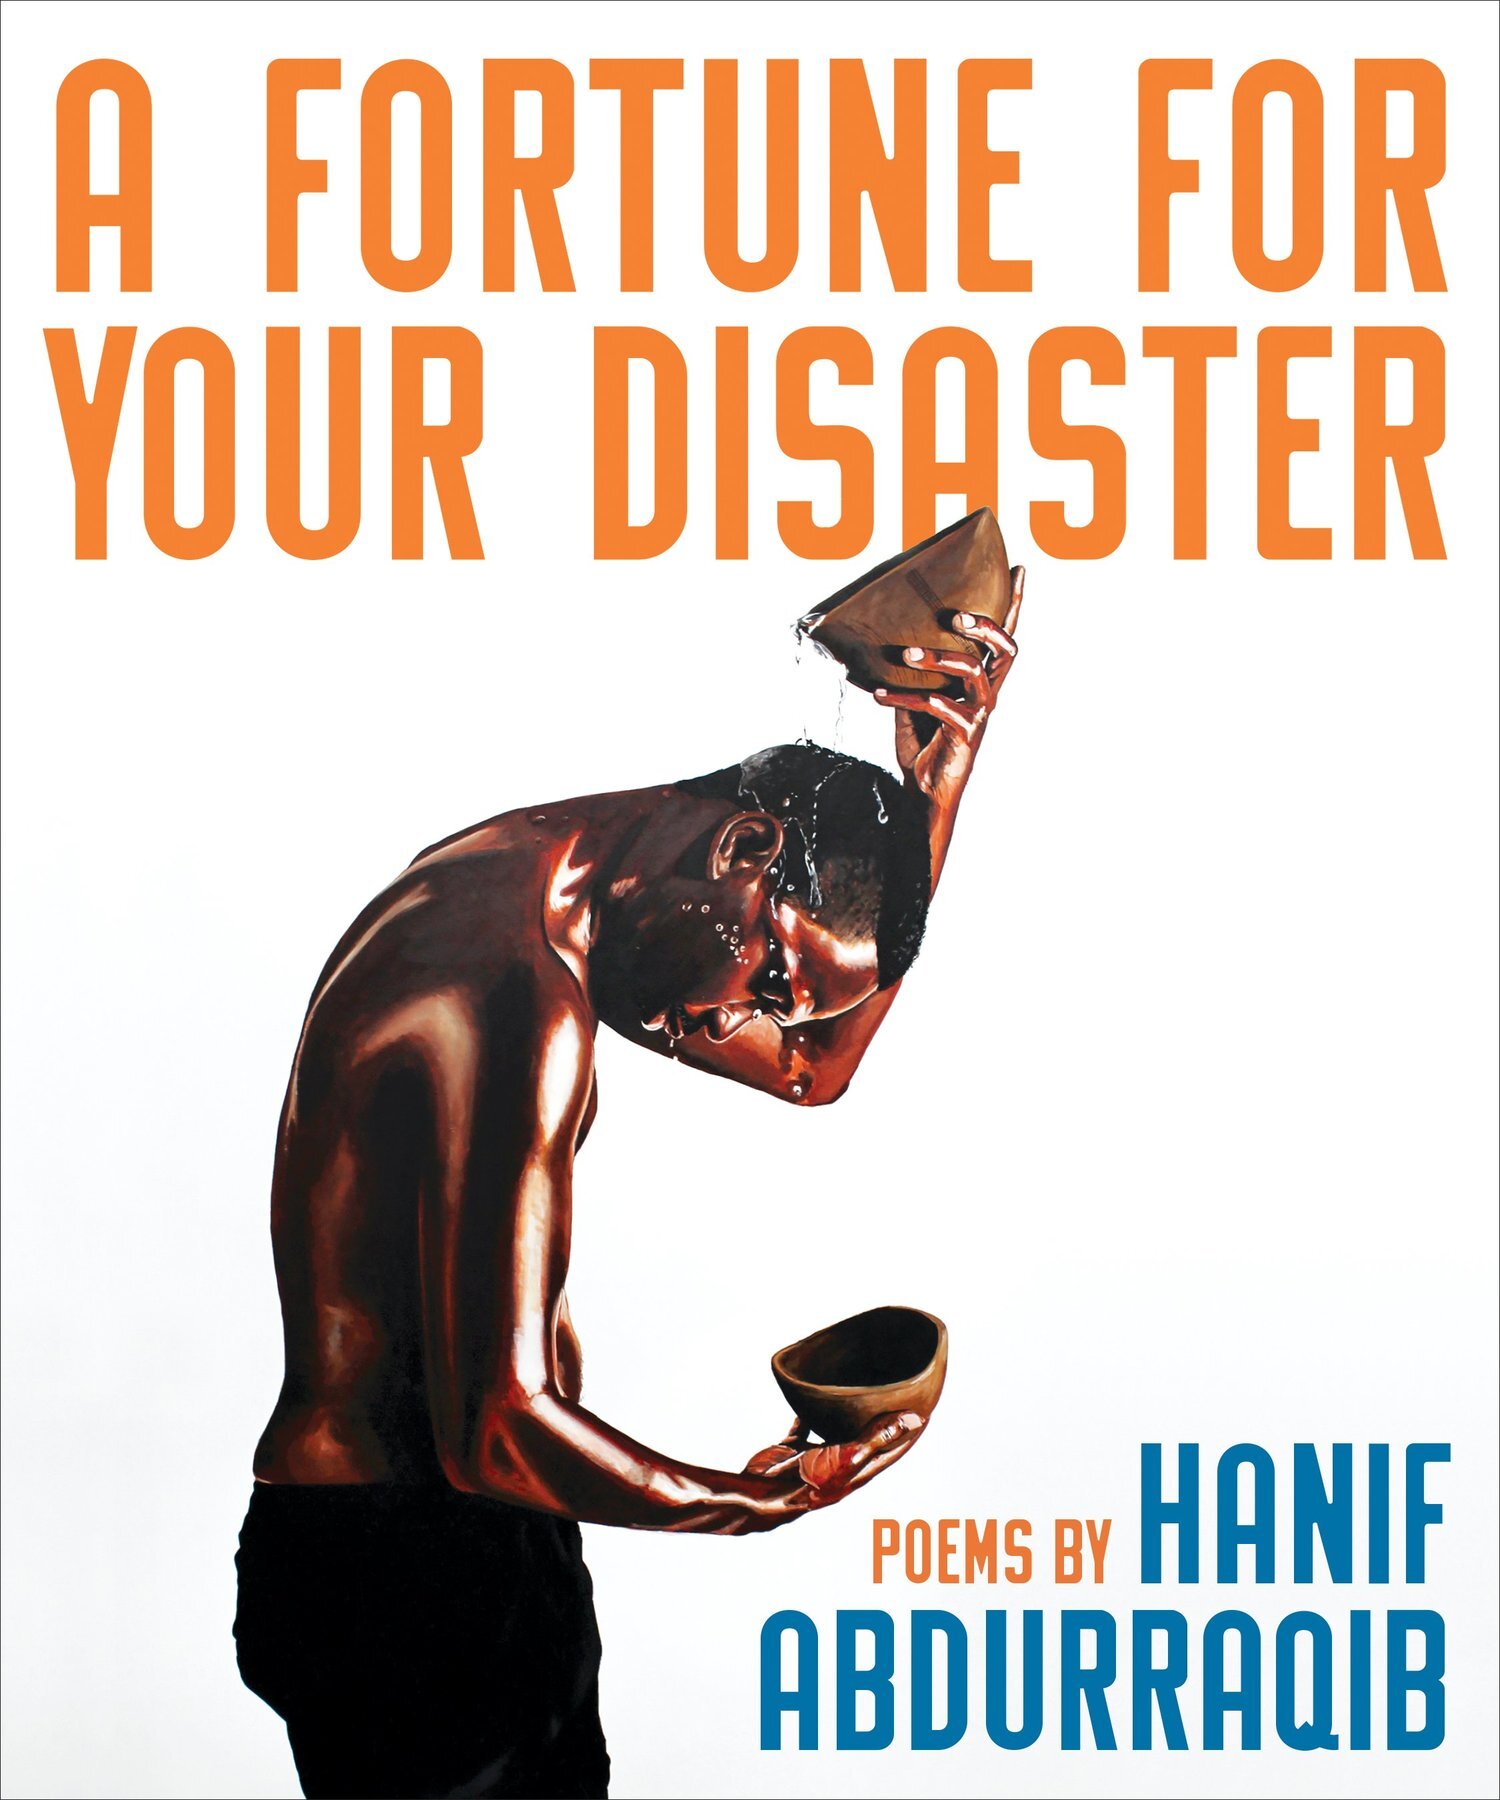 A-Fortune-for-Your-Disaster-Cover-RGB.jpg